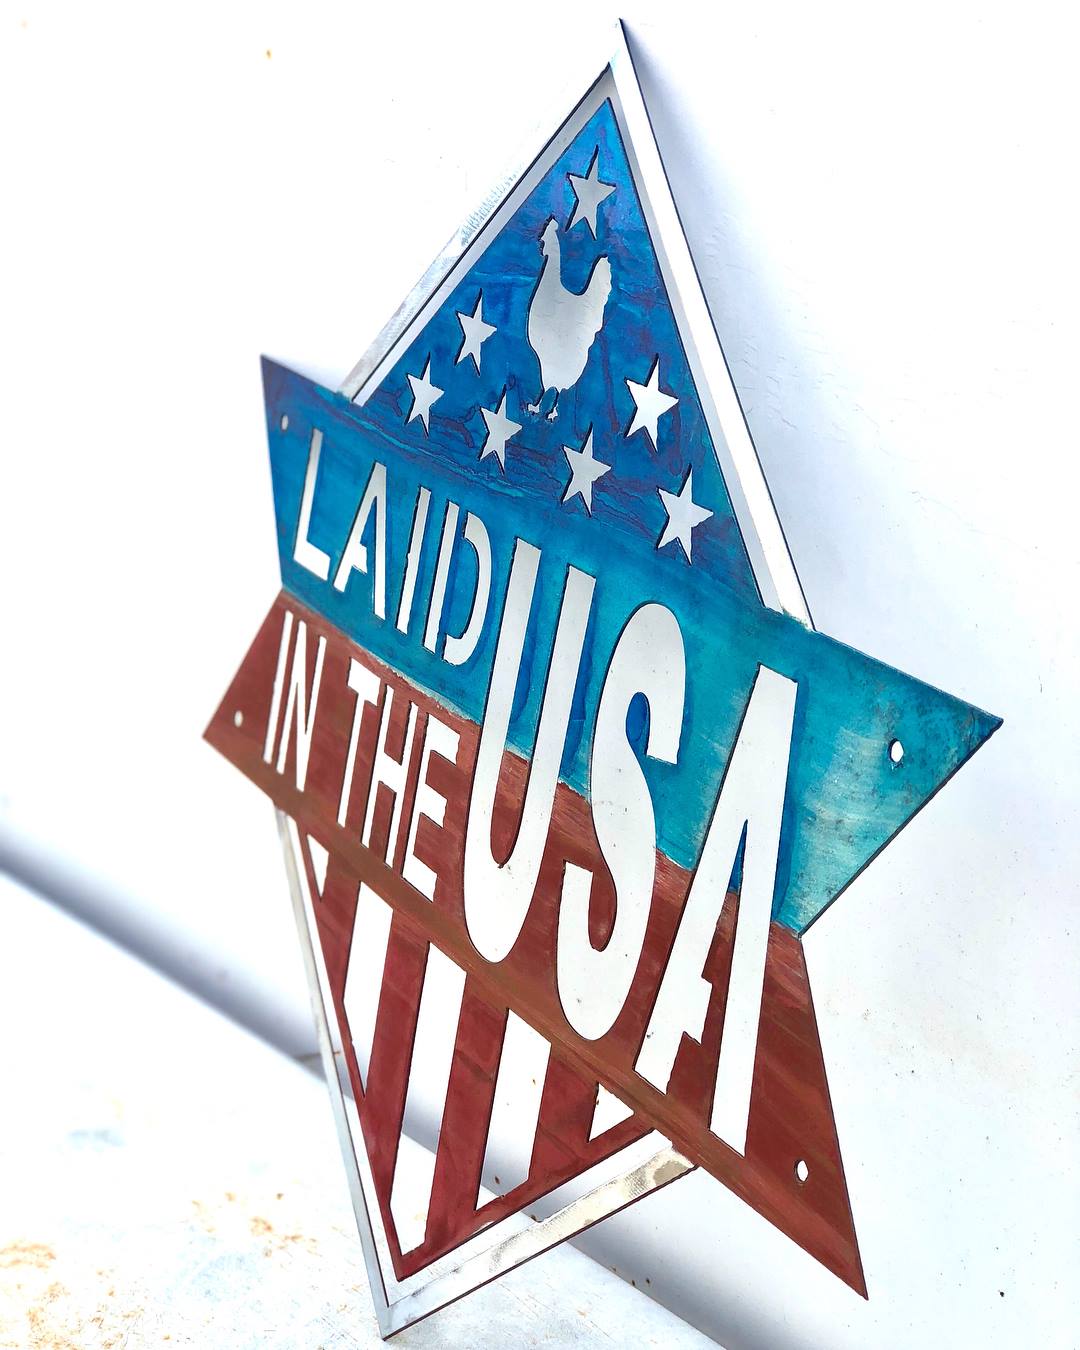 Diamond Banner Laid in the USA Metal Sign